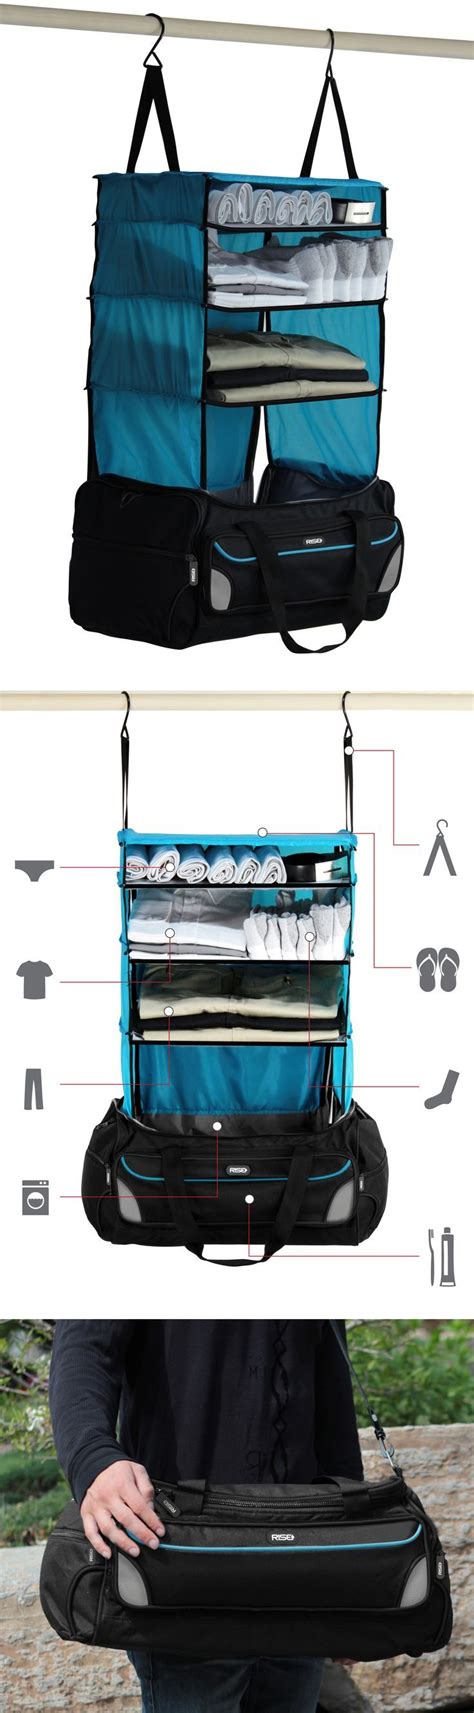 Rise And Hang Forget Unpacking This Clever Weekender Bag Has Built